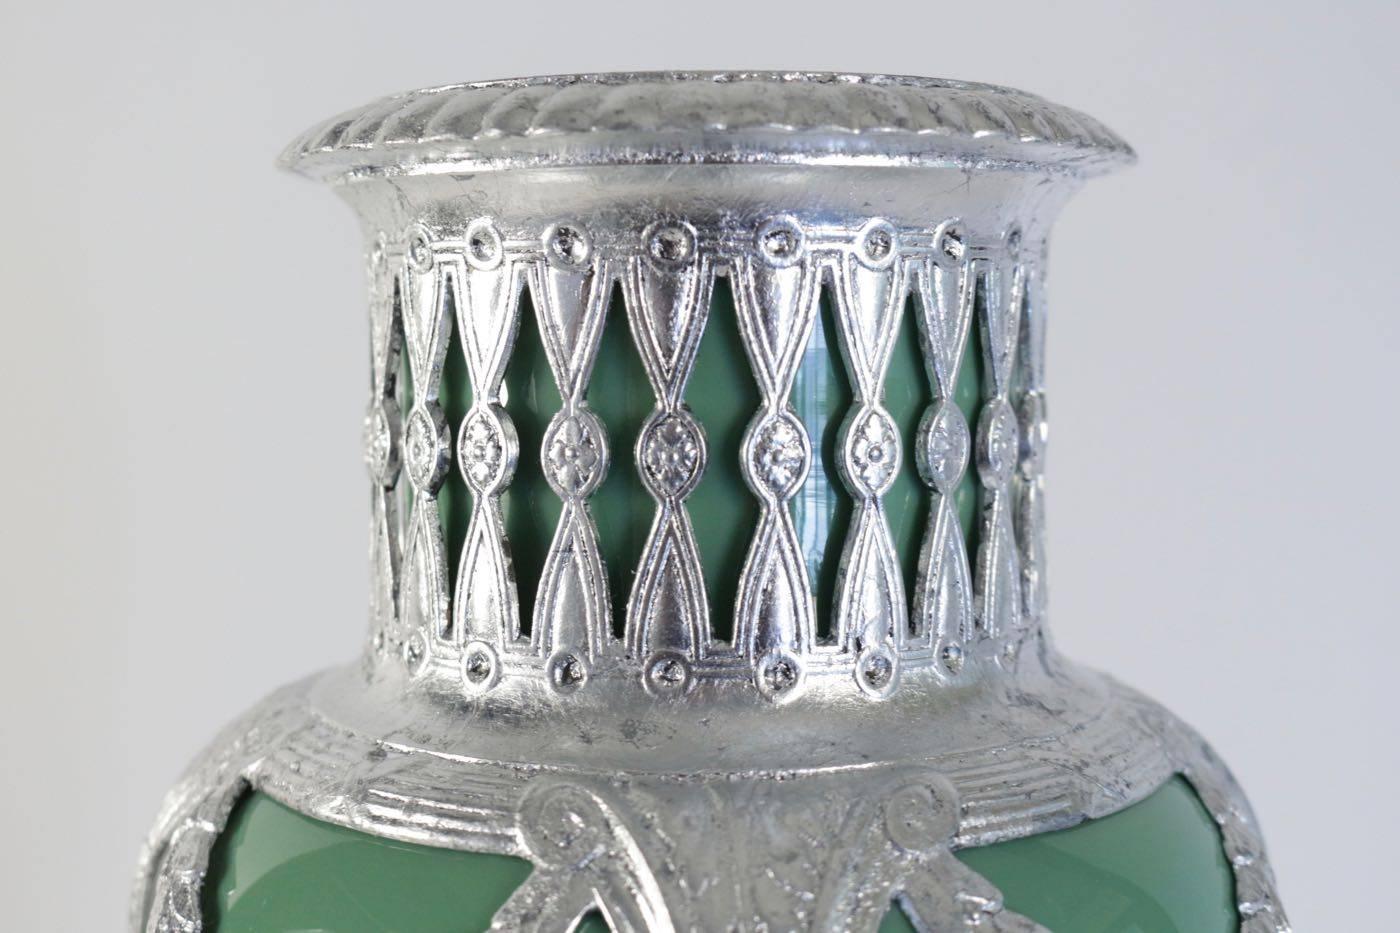 Silvered Celadon Vase in Faience, Silver Plate and Silver Leaf, 19th Century Period For Sale